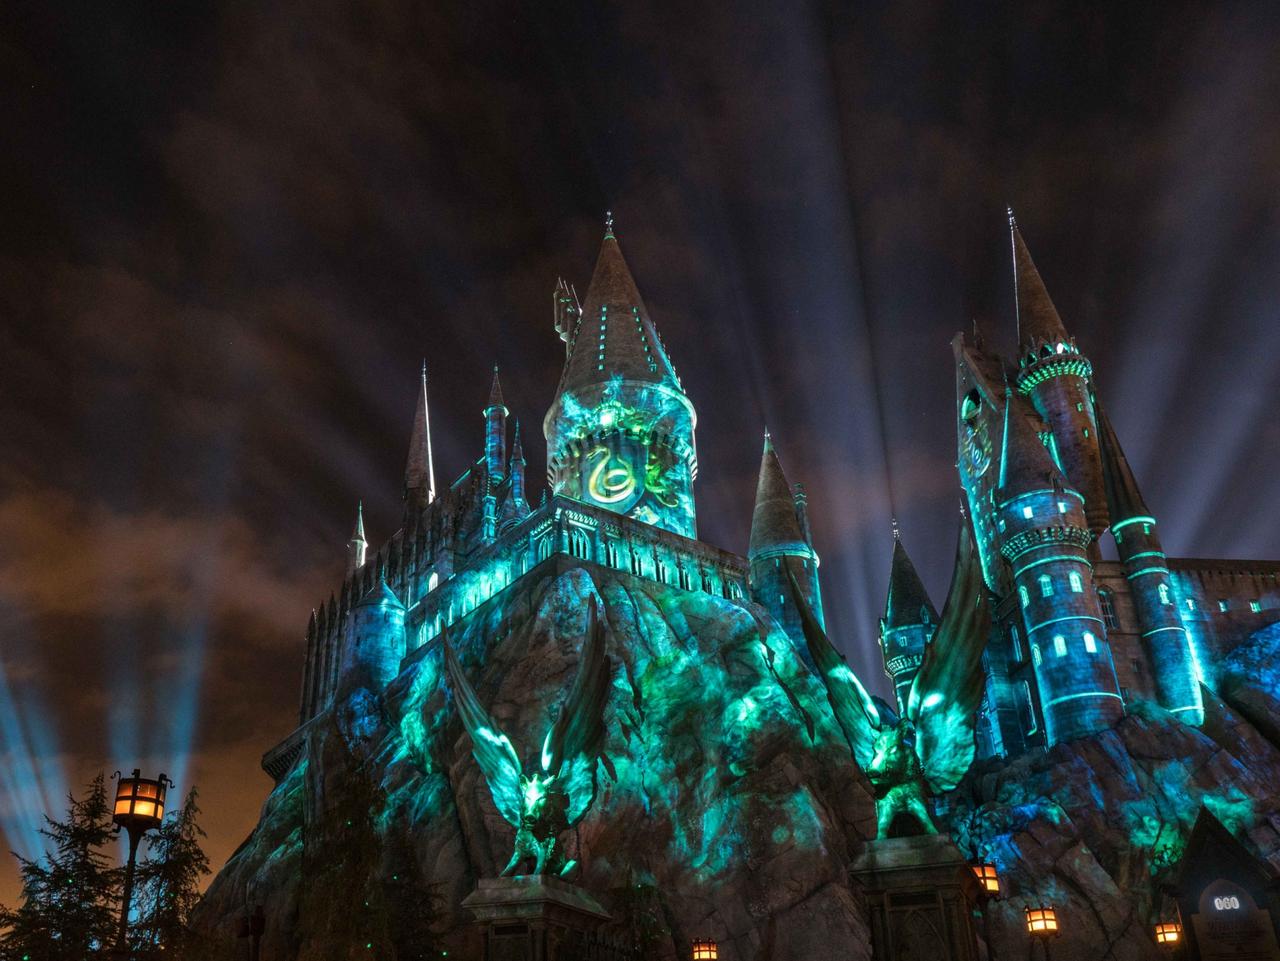 ESCAPE: Cover Story, November 5, Theme Park Hacks -  "The Nighttime Lights at Hogwarts Castle" at "The Wizarding World of Harry Potter" at Universal Studios Hollywood. Picture: Universal Studios Hollywood